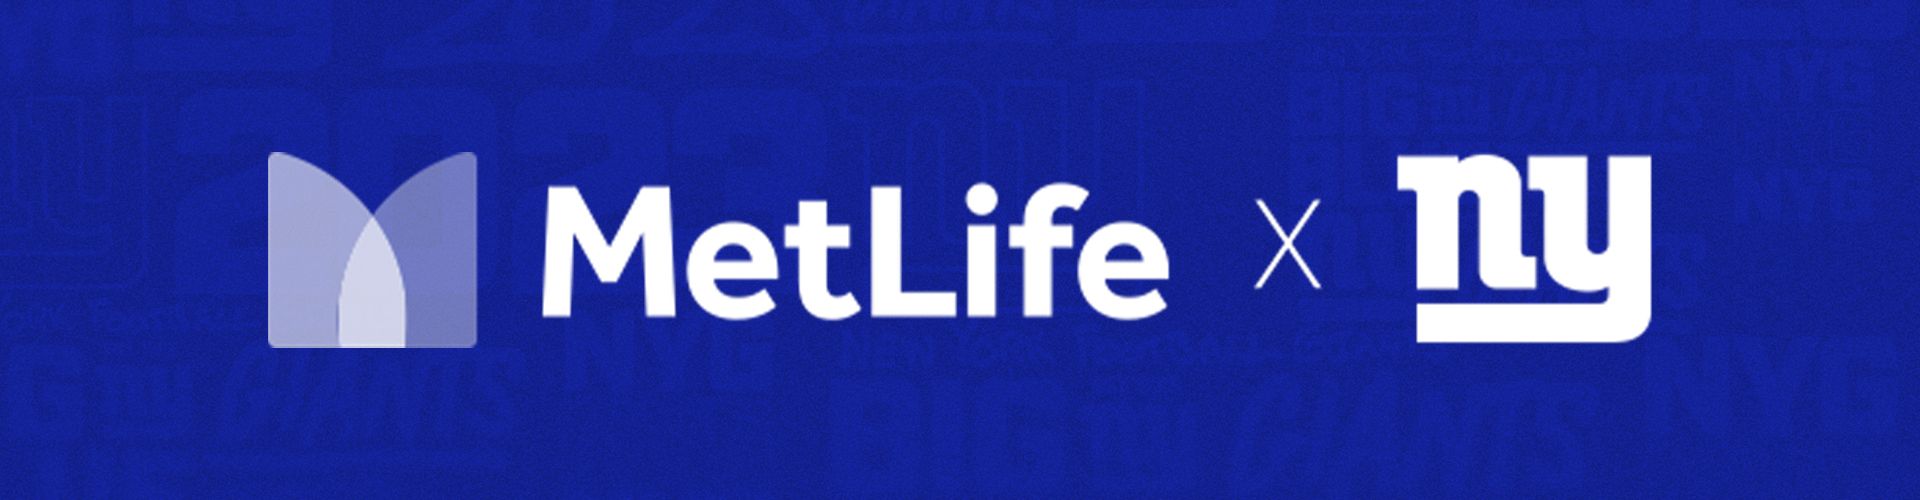 MetLife Partners with the New York Giants to Help Support NYC First  Responders - FDNY Foundation